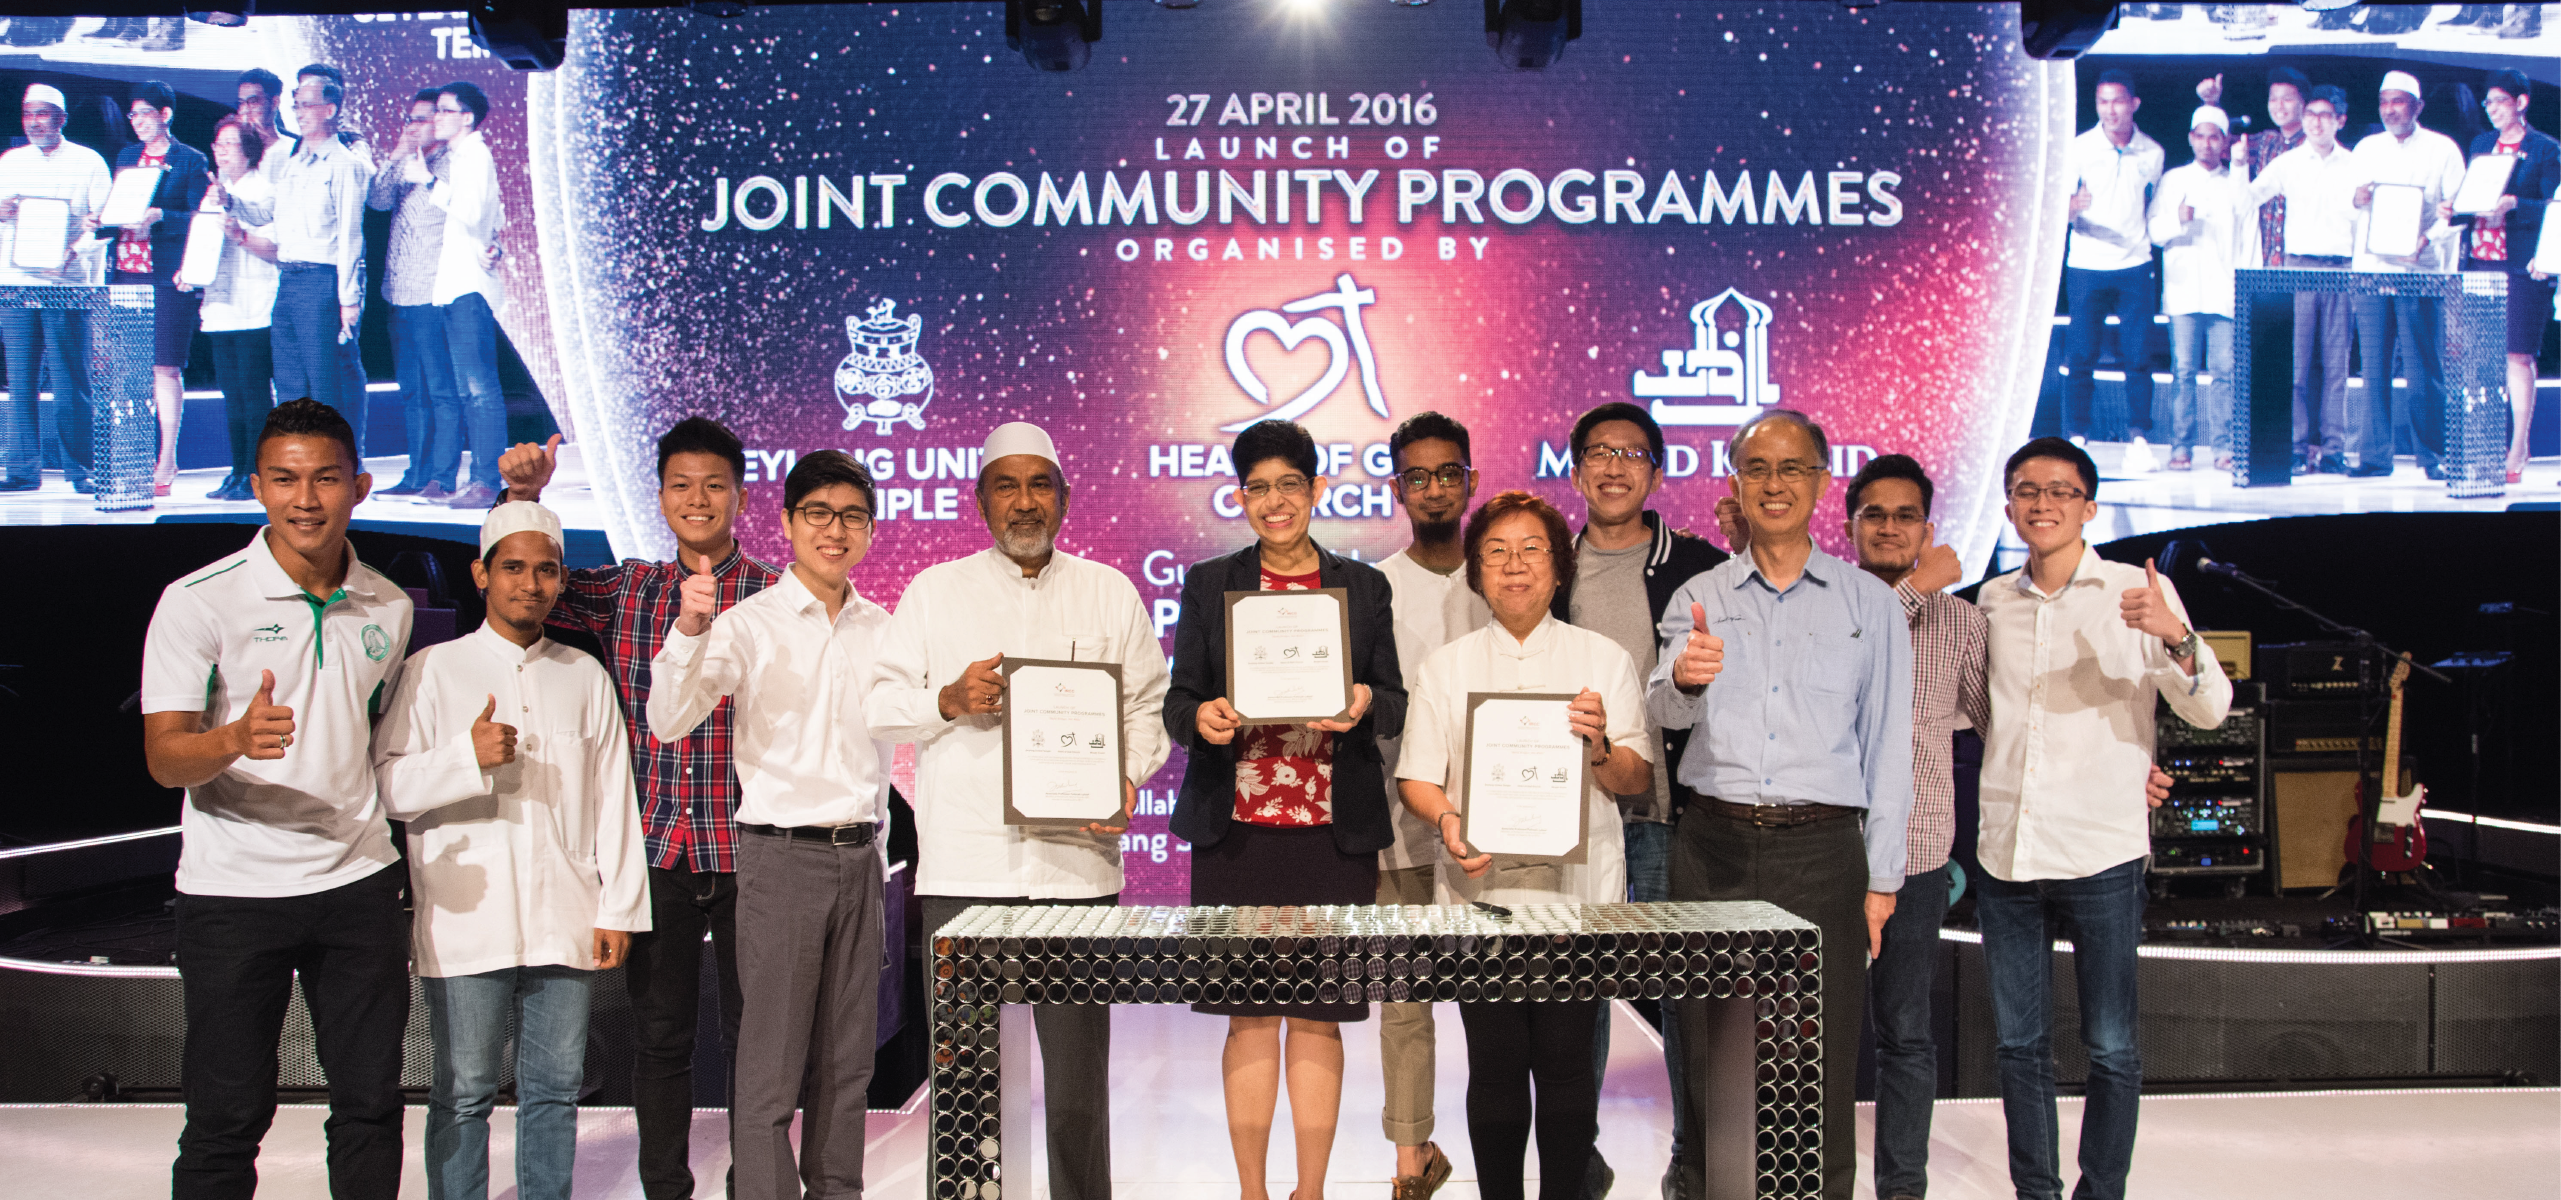 Heart of God Church Launches Joint Community Programmes With Khalid Mosque and Geylang United Temple